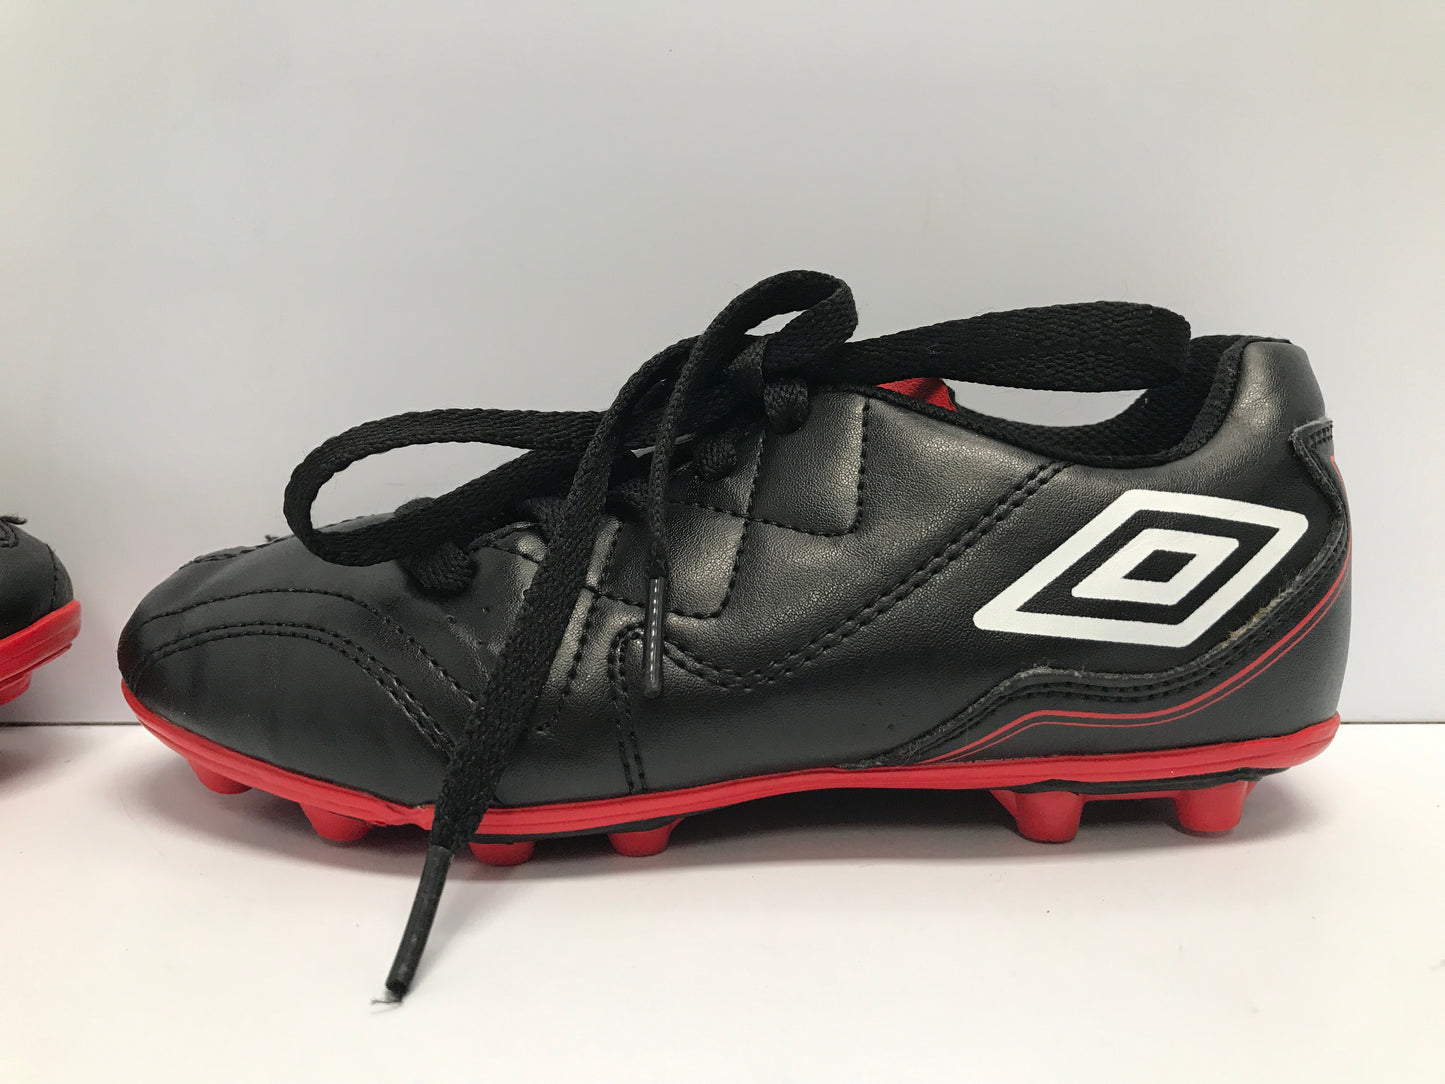 Soccer Shoes Cleats Child Size 1 Umbro Black Red Excellent